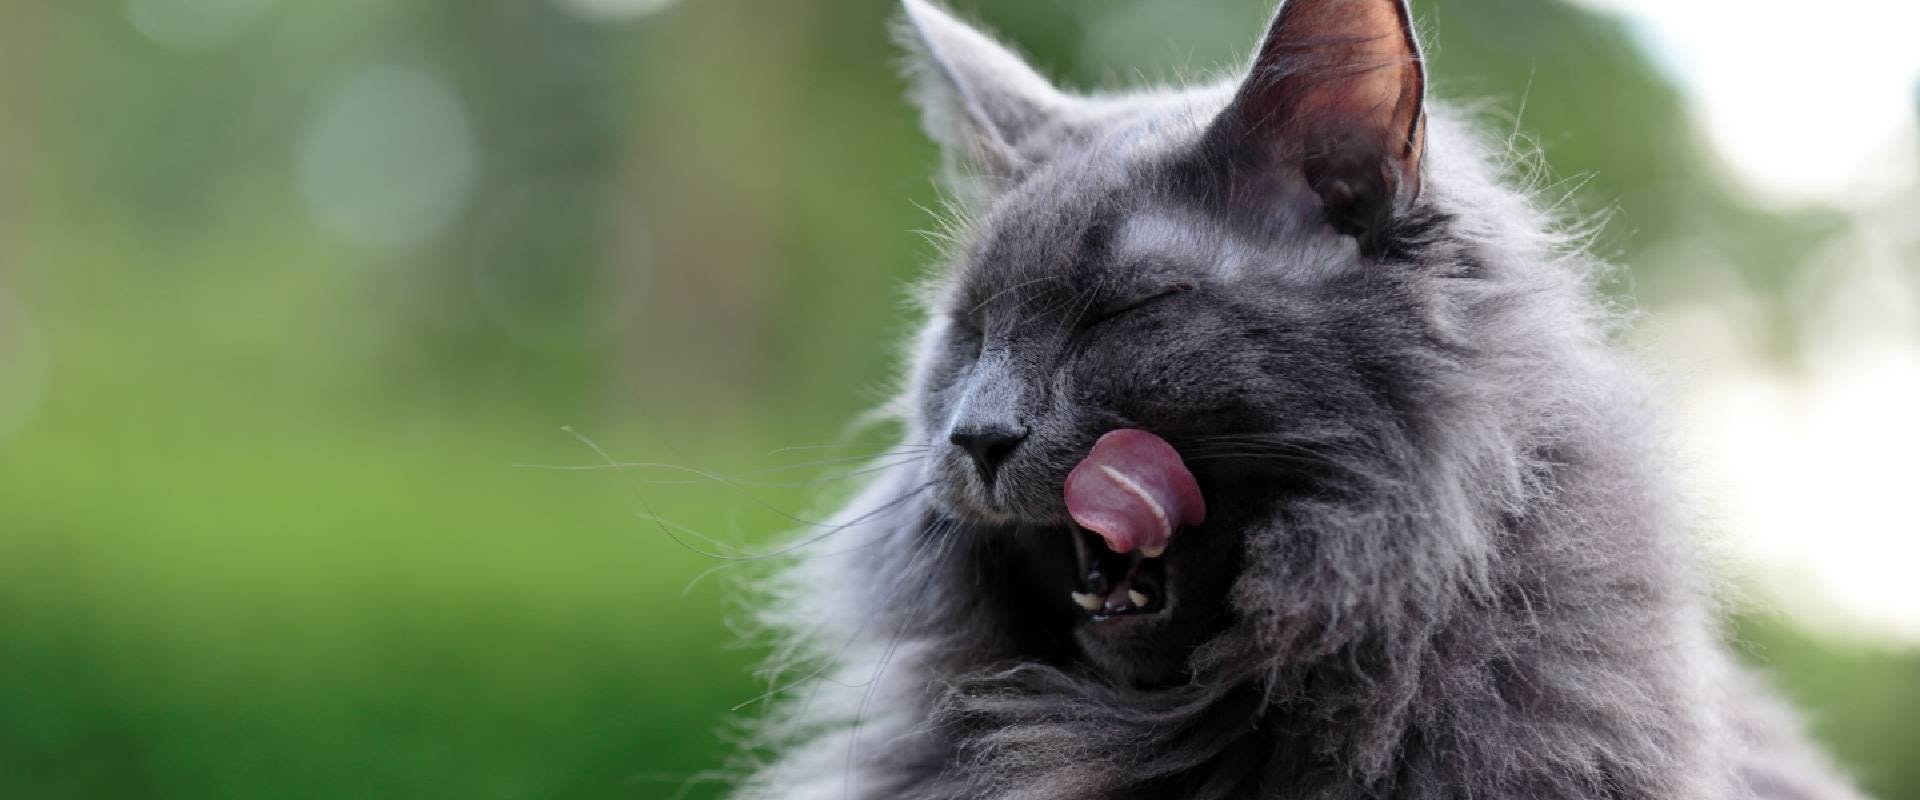 Fluffy gray cat licking their lips